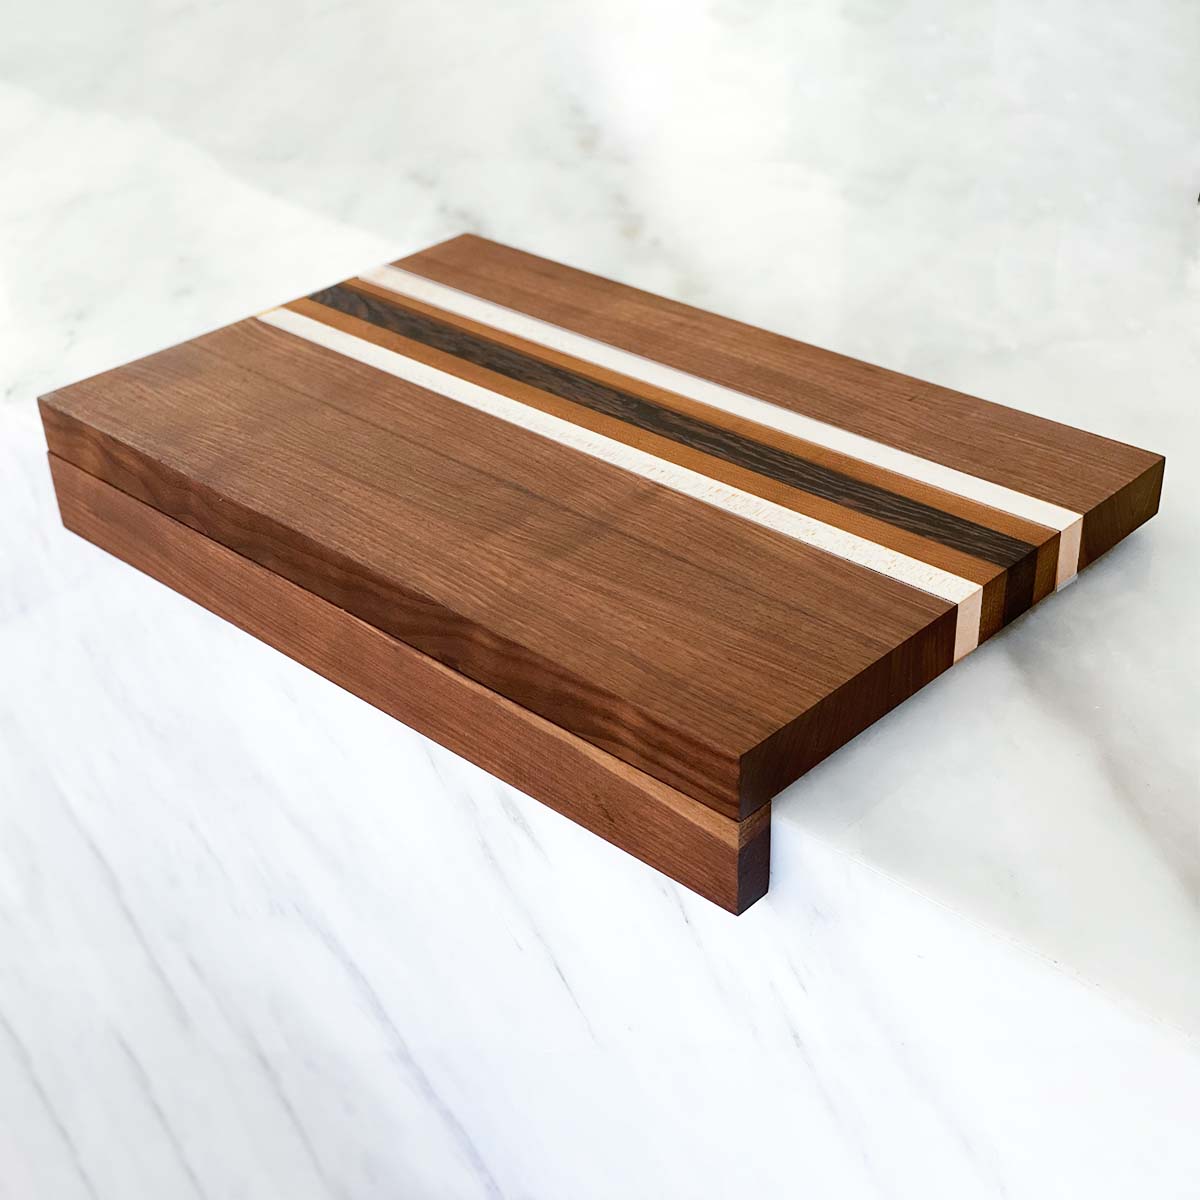 Walnut + Maple + Wenge Over The Counter Edge Grain Cutting Board "The Woodlawn"